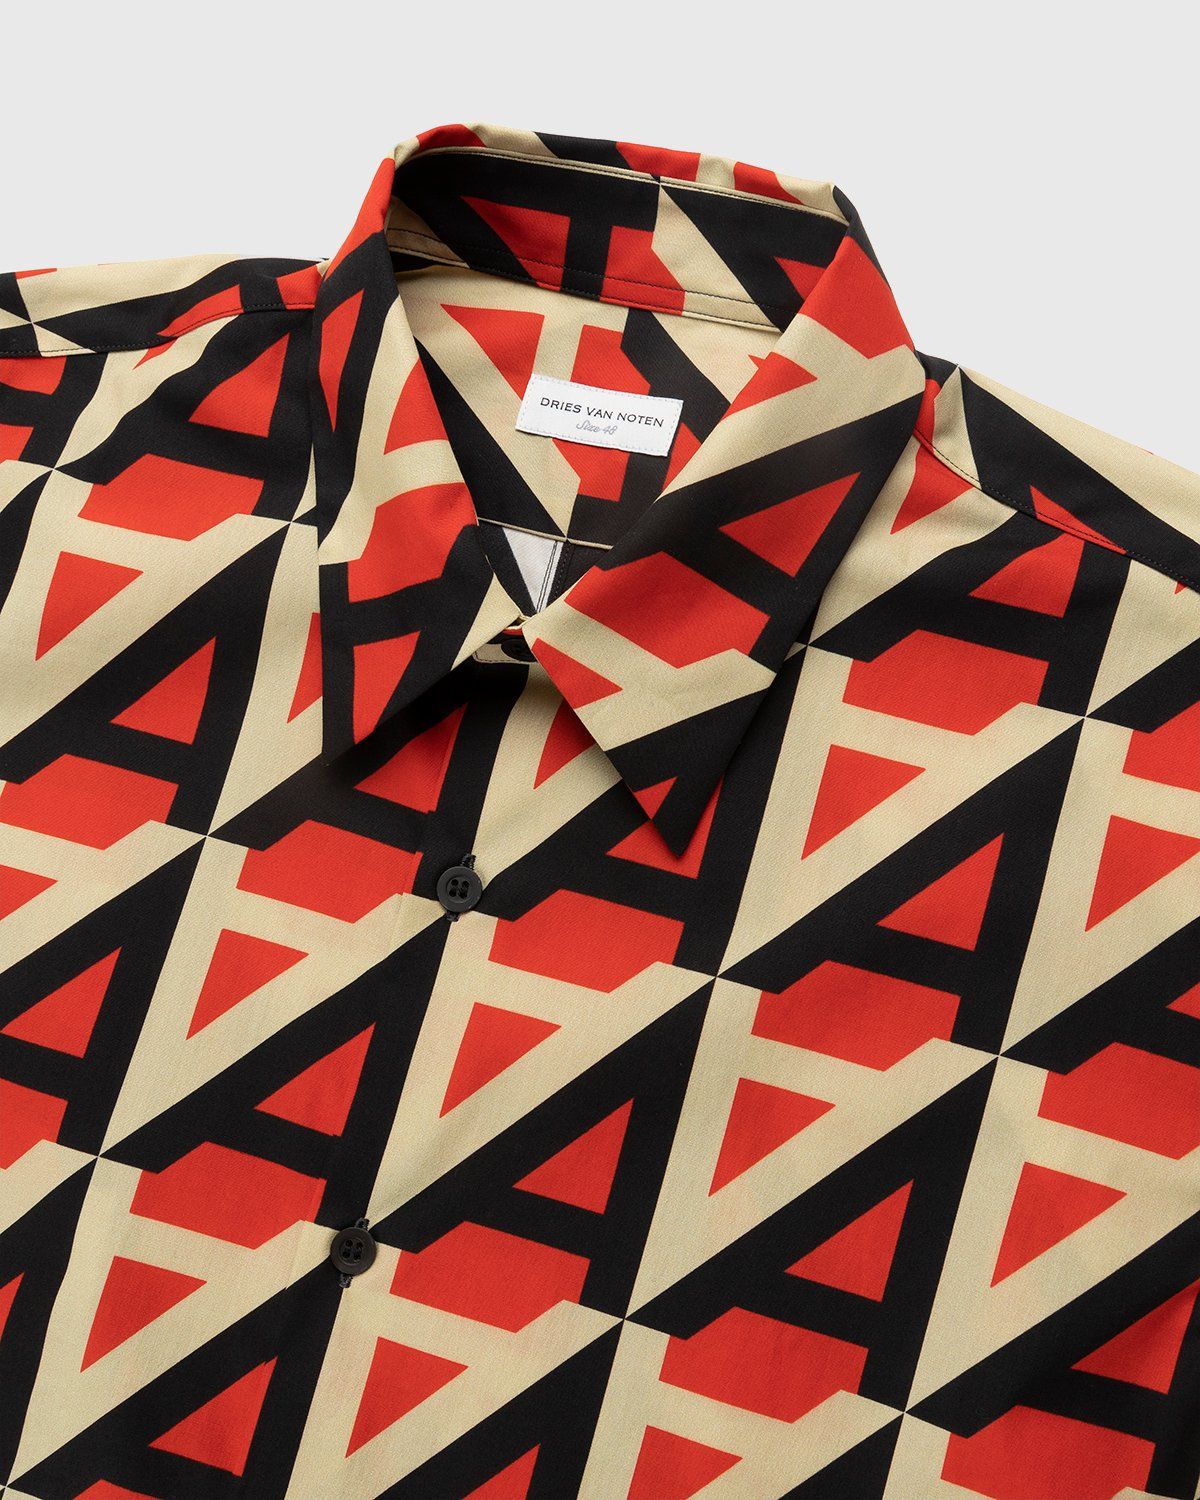 Dries van Noten – Curle "A" Shirt Red - Longsleeve Shirts - Red - Image 4